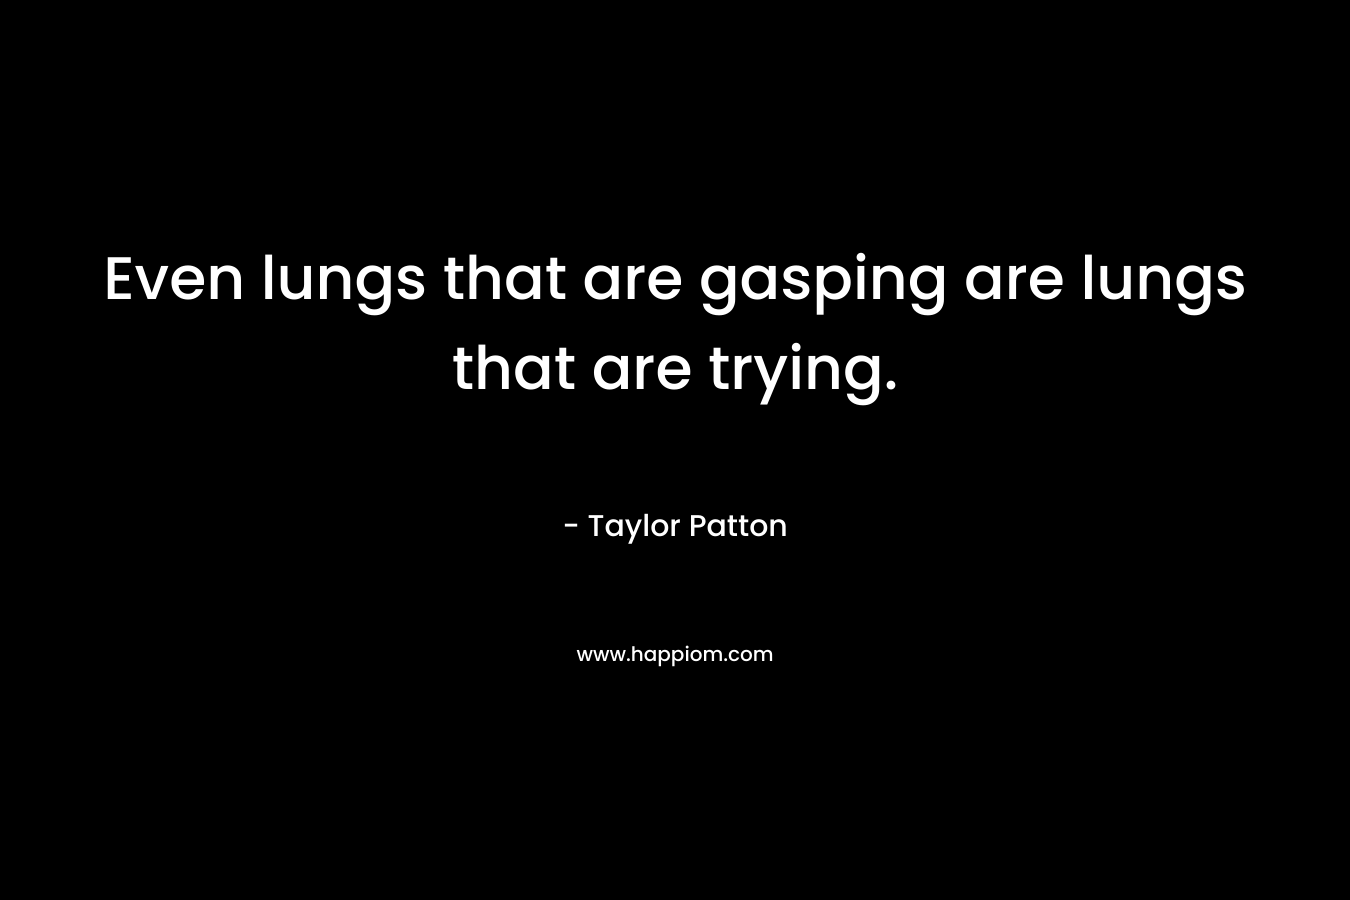 Even lungs that are gasping are lungs that are trying. – Taylor Patton